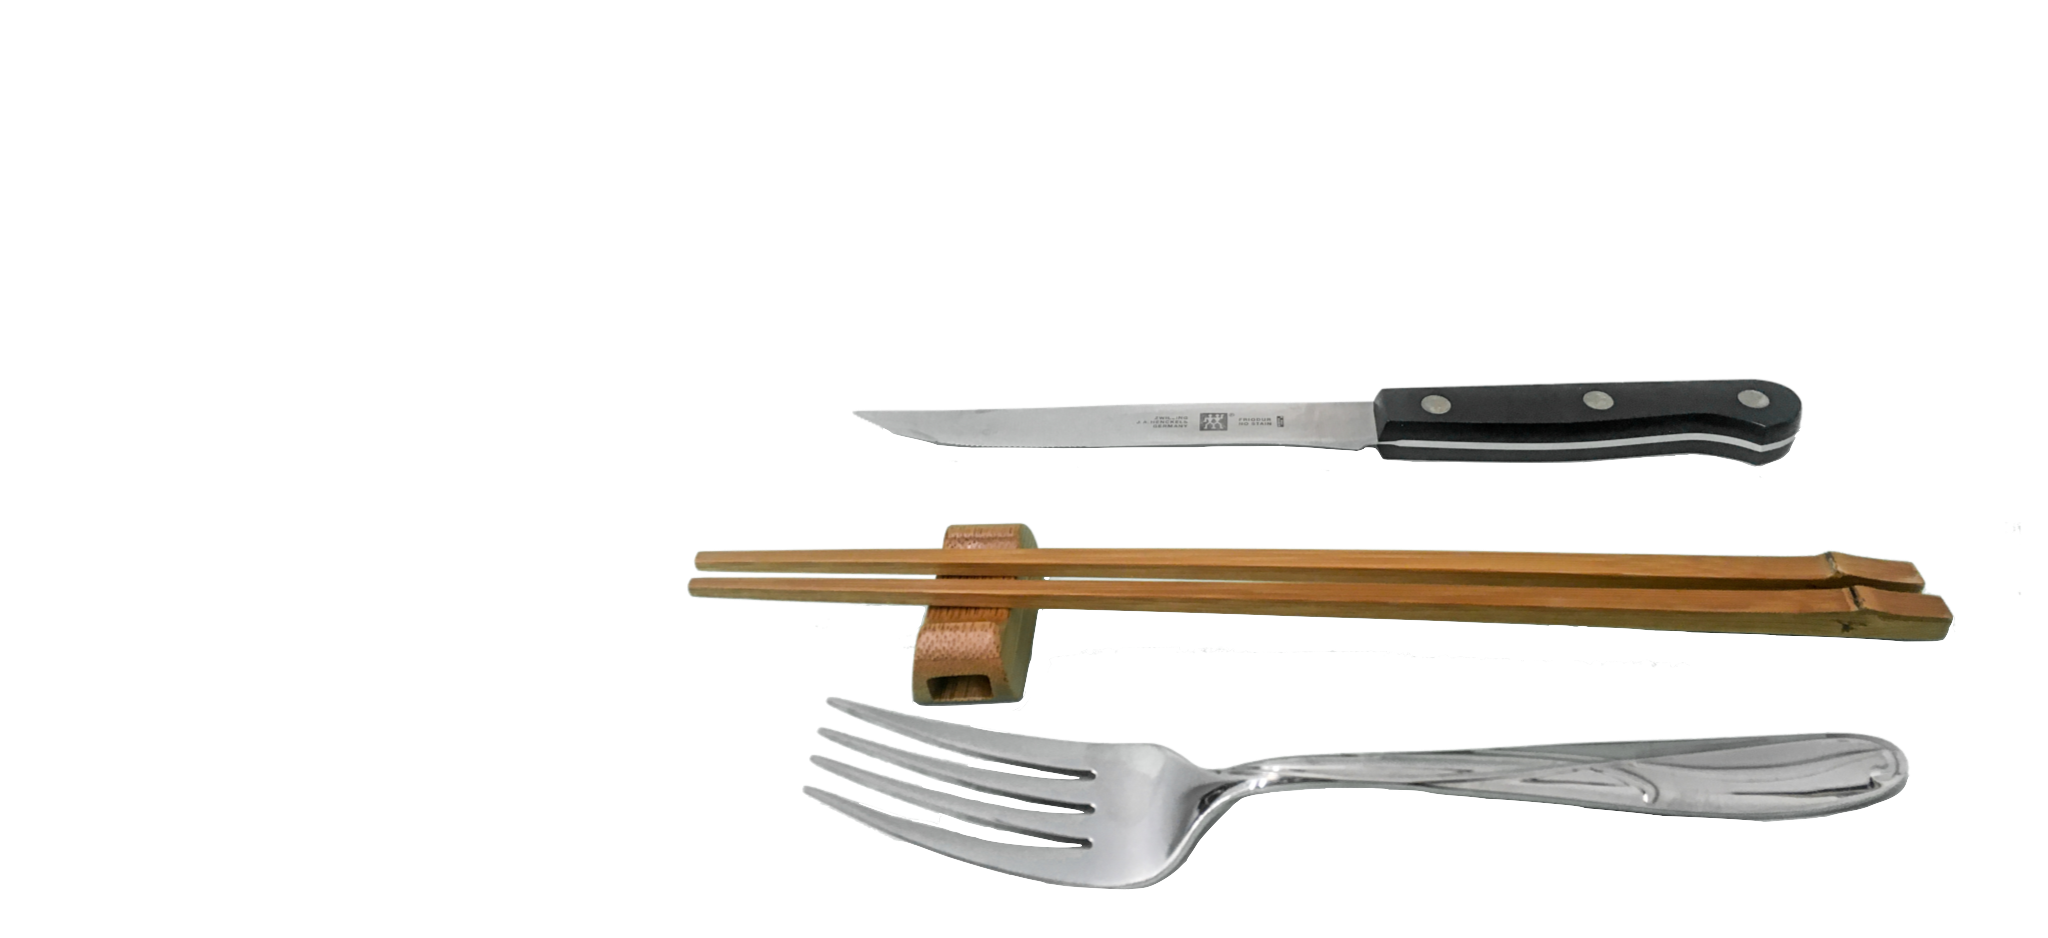 #UtensilEquality: Chopsticks, Knife and Fork on the table. oceanwp elementor banner with transparent bg. (chopsticks)